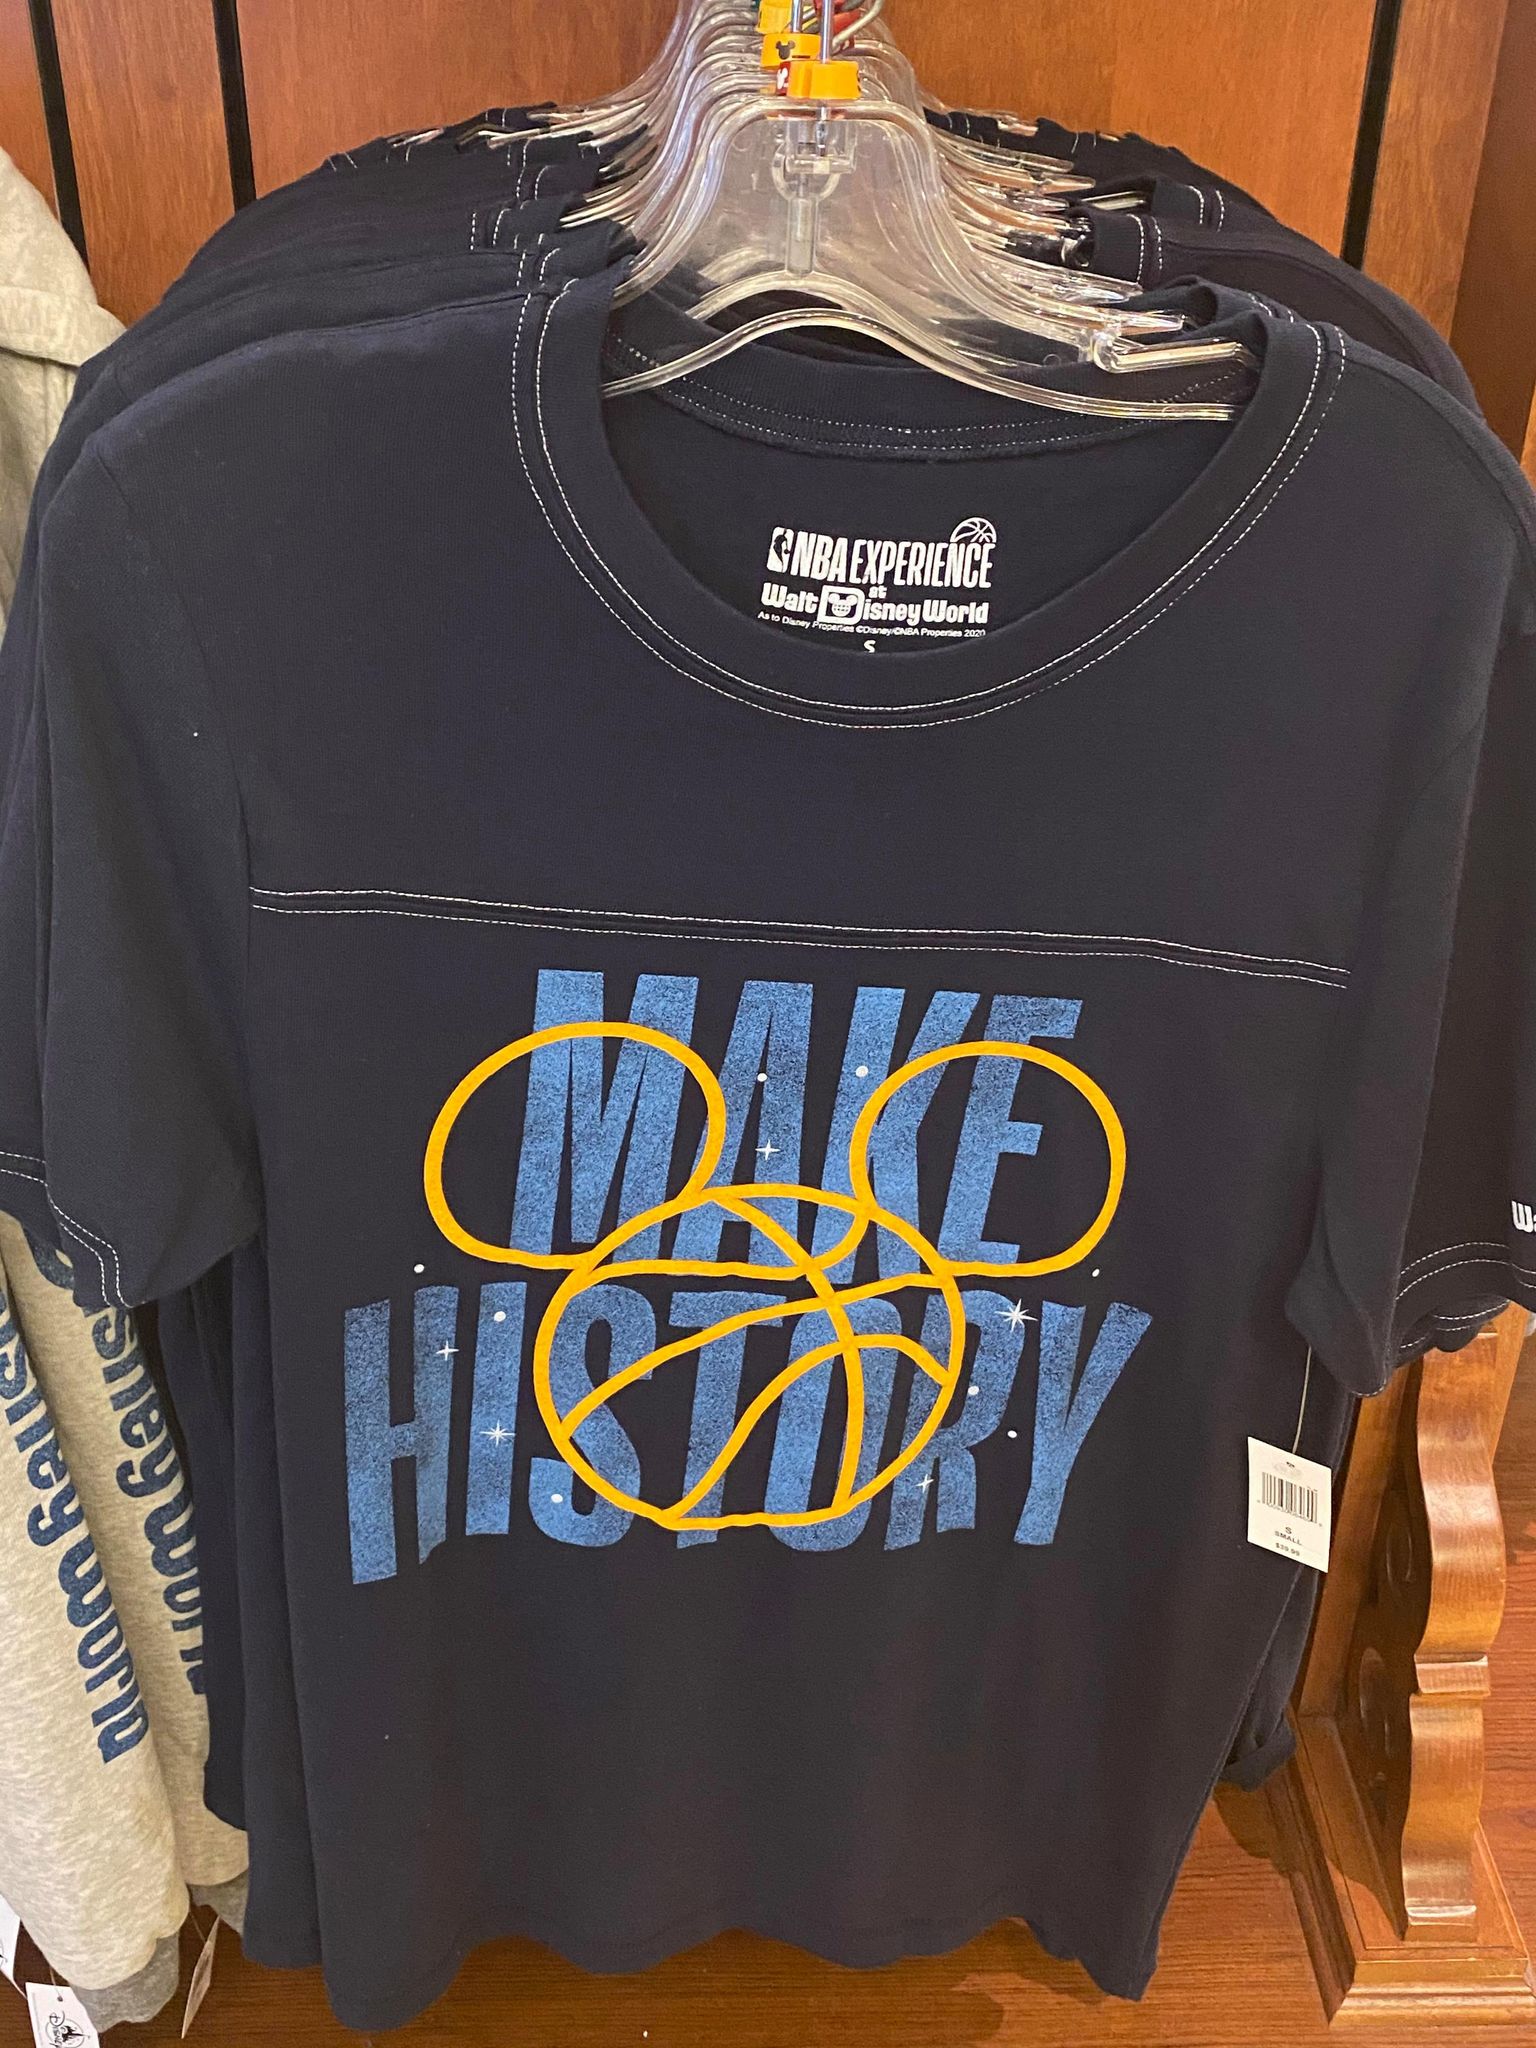 Even More Awesome NBA Merch Hits The Shelves at Disney - MickeyBlog.com